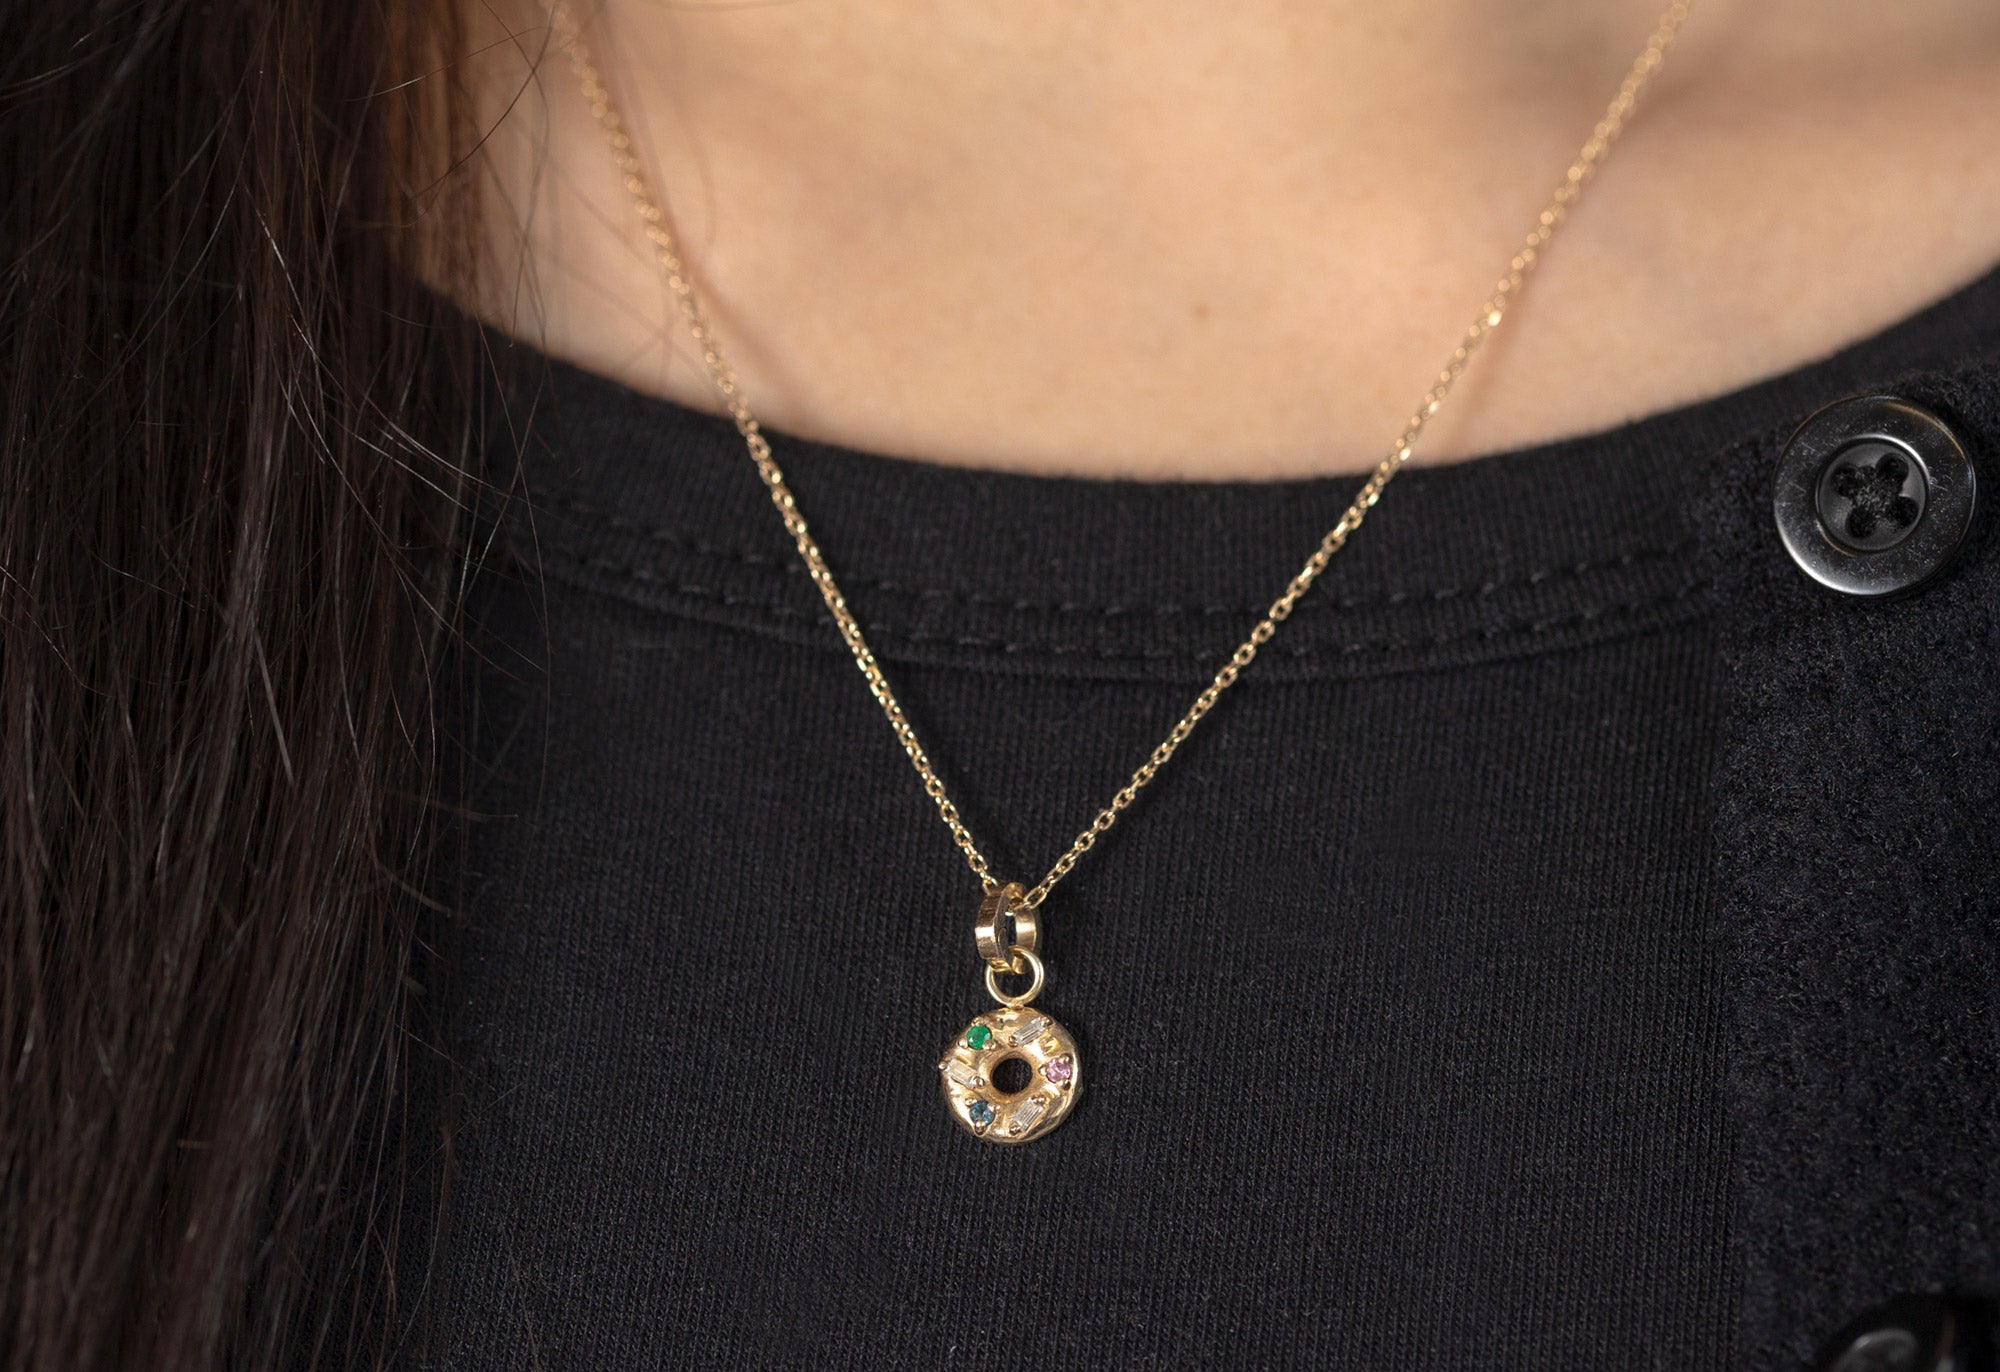 10k Yellow Gold Donut Charm on Necklace Chain on Model